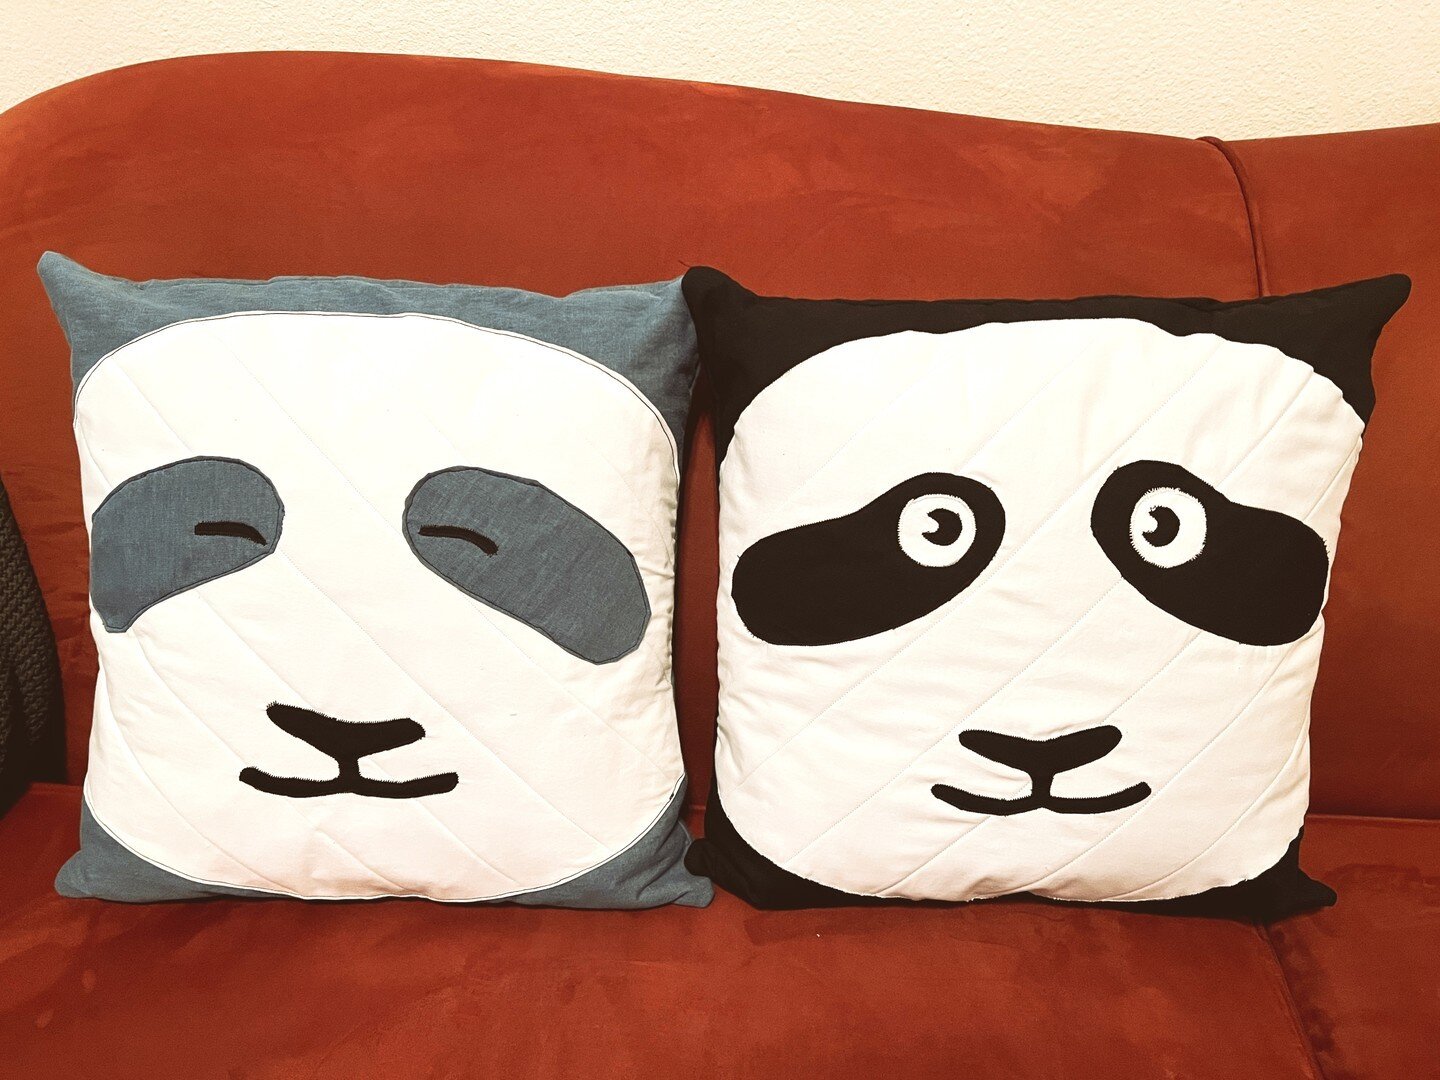 Cute cute cute! My sweet friend @anneliujohnston made these for my home office ⭐️ They make me and my clients SMILE every single day! Thank you for the joy, Anne! 
.
.
.
#panda #officedecor #zenvibes #cuteanimals #pillows #restorativeyoga #careerzen 